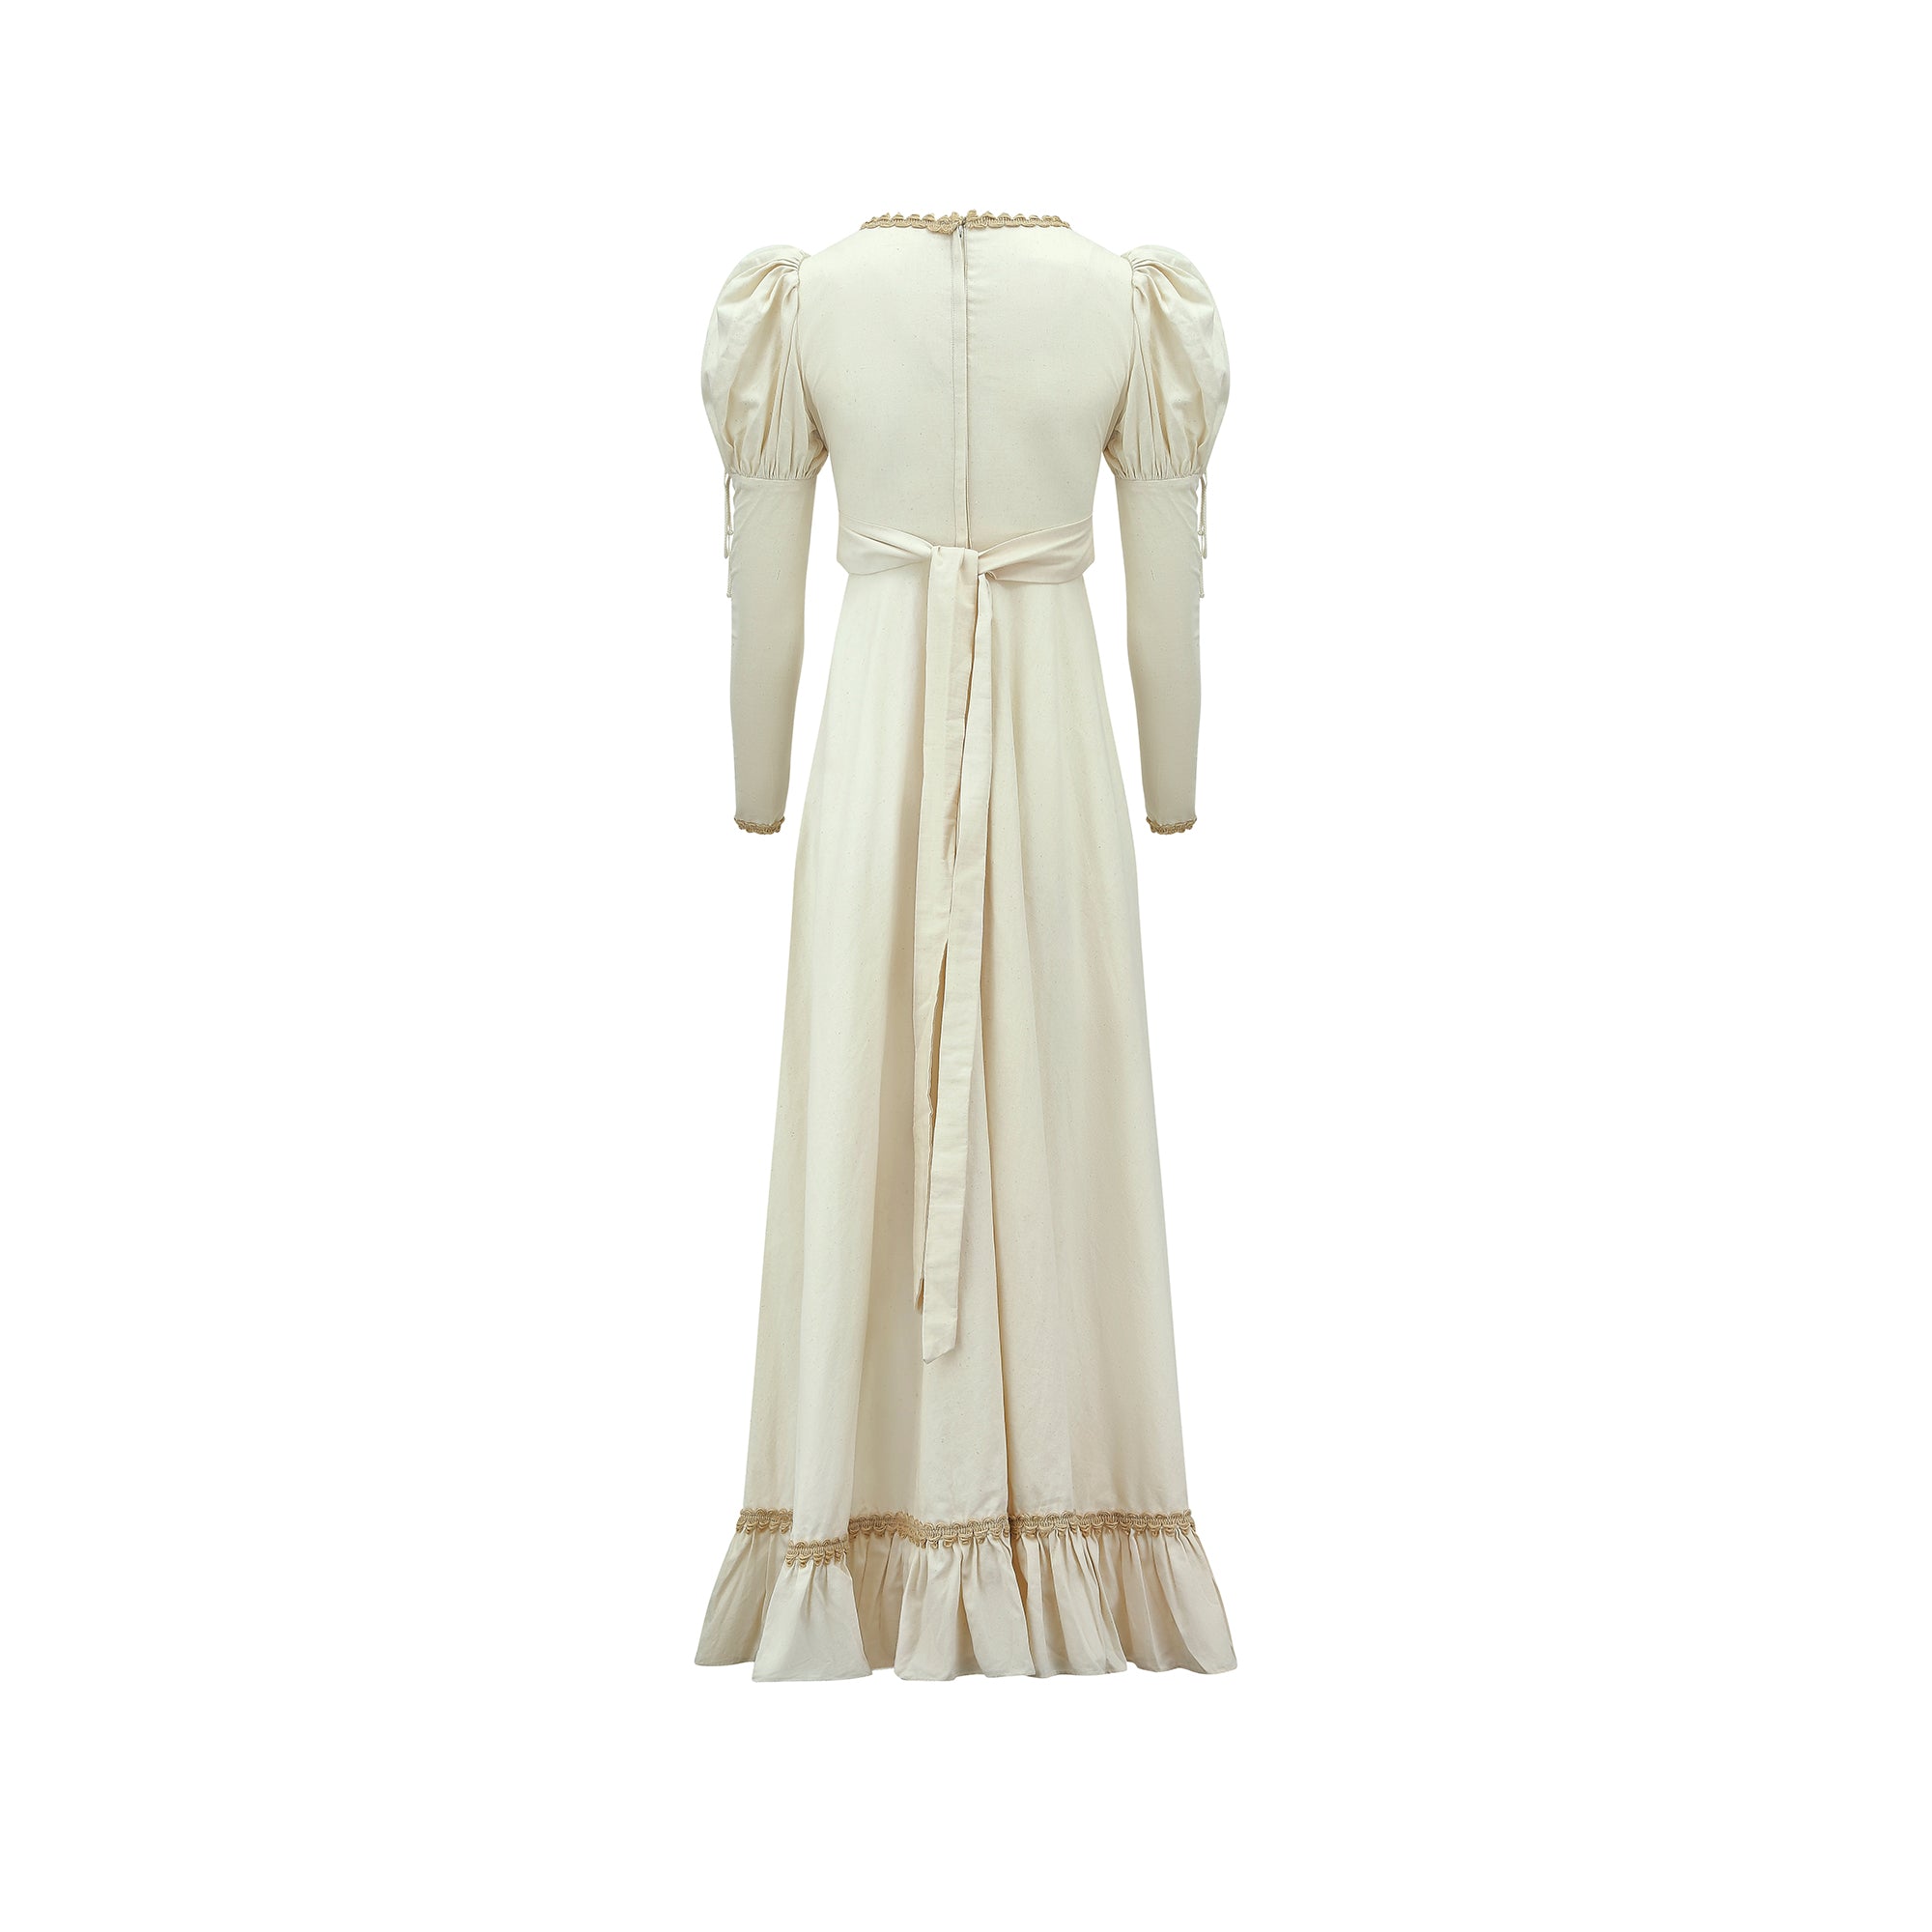 ARCHIVE - 1970s Gunne Sax Medieval Lace-Up Maxi Dress